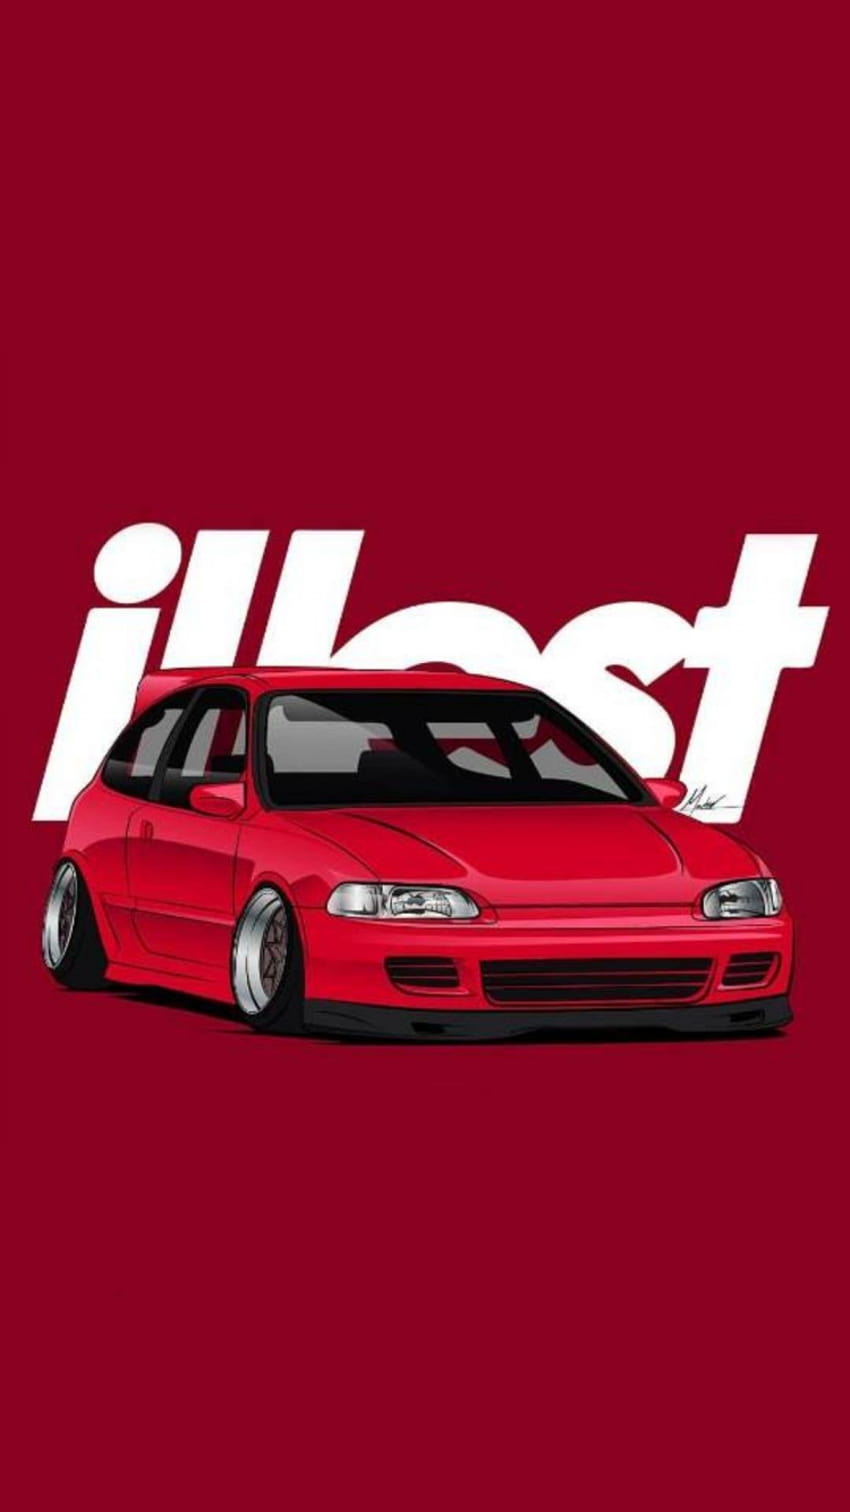 13 Illest Logo Iphone Bizt Honda civic [1080x1920] for your , Mobile & Tablet, 90s jdm aesthetic ps4 HD phone wallpaper